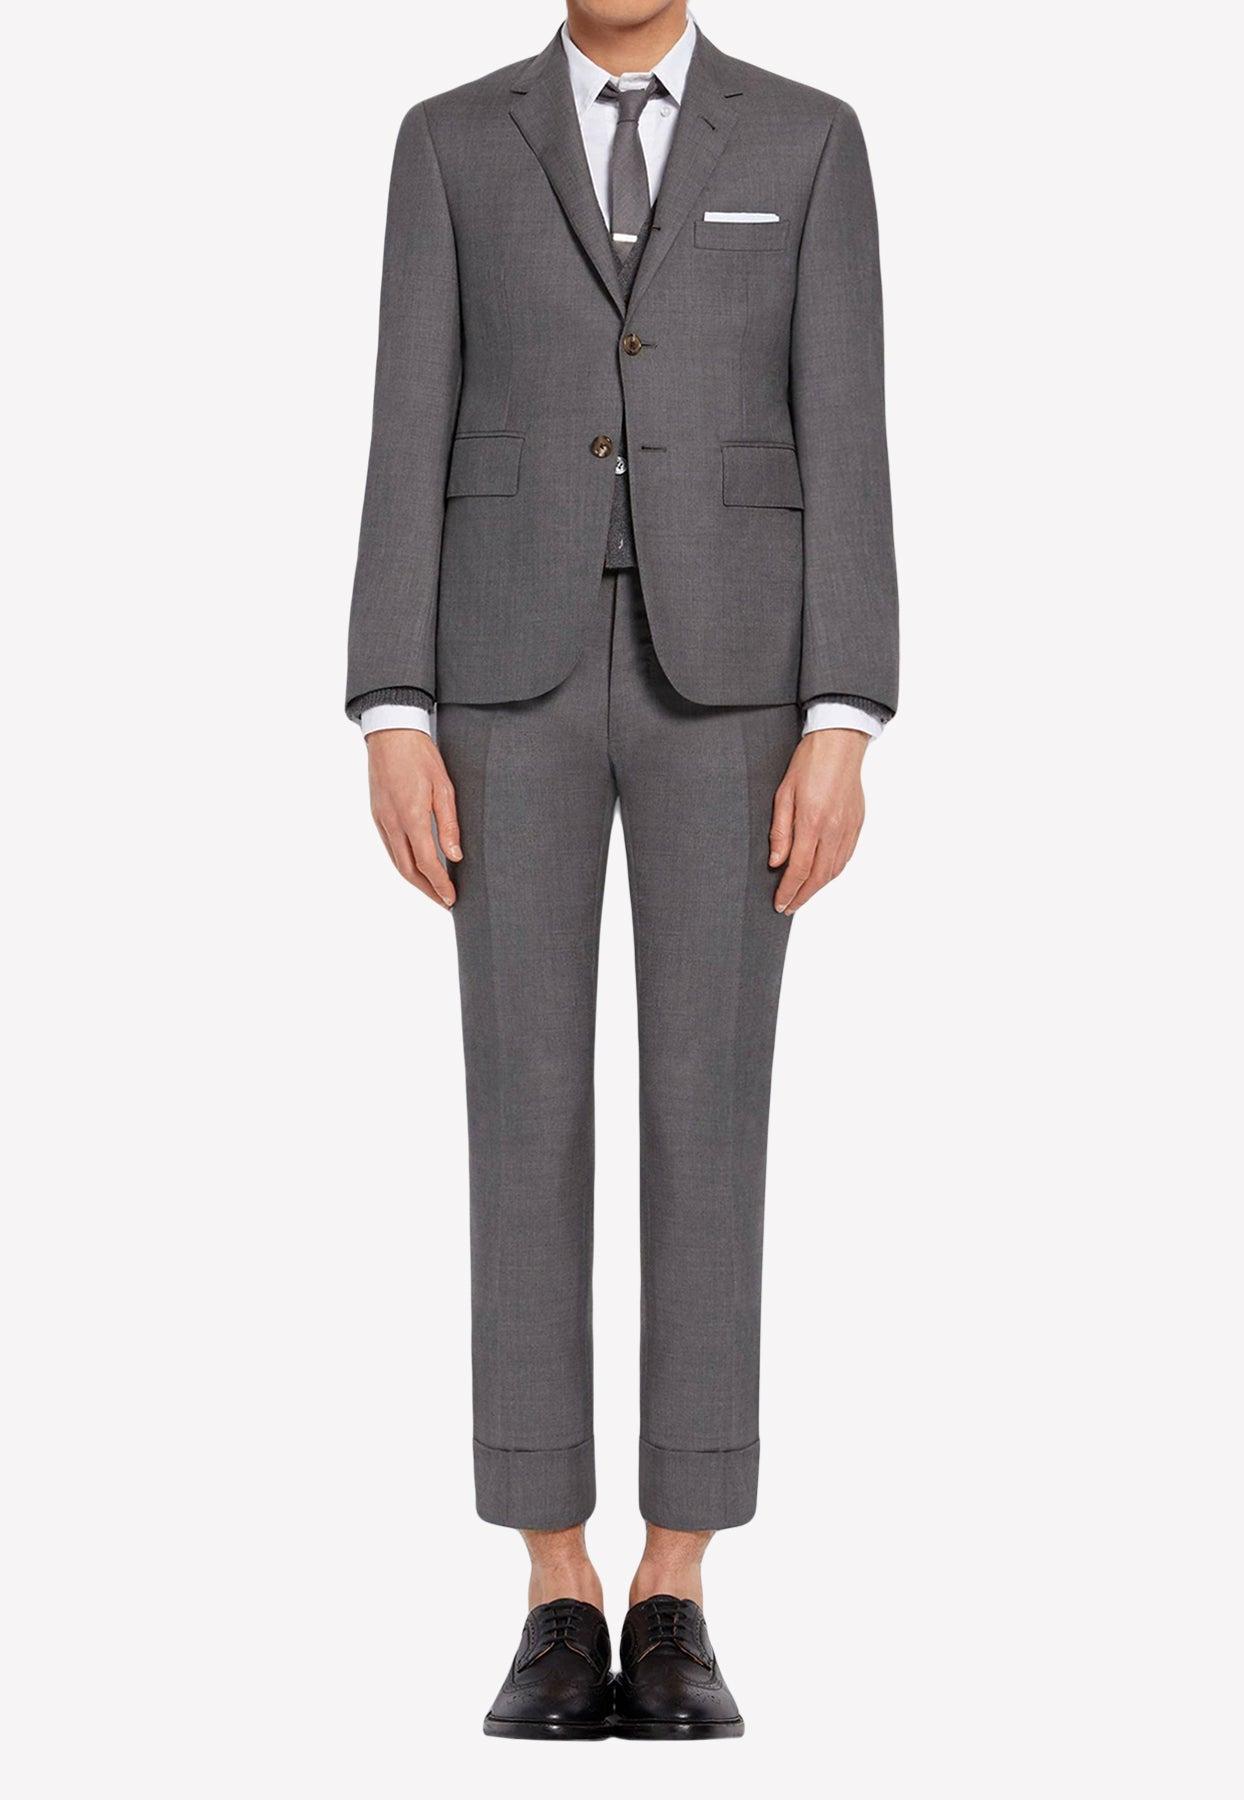 Thom Browne Super 120 Wool Suit Set in Gray for Men | Lyst